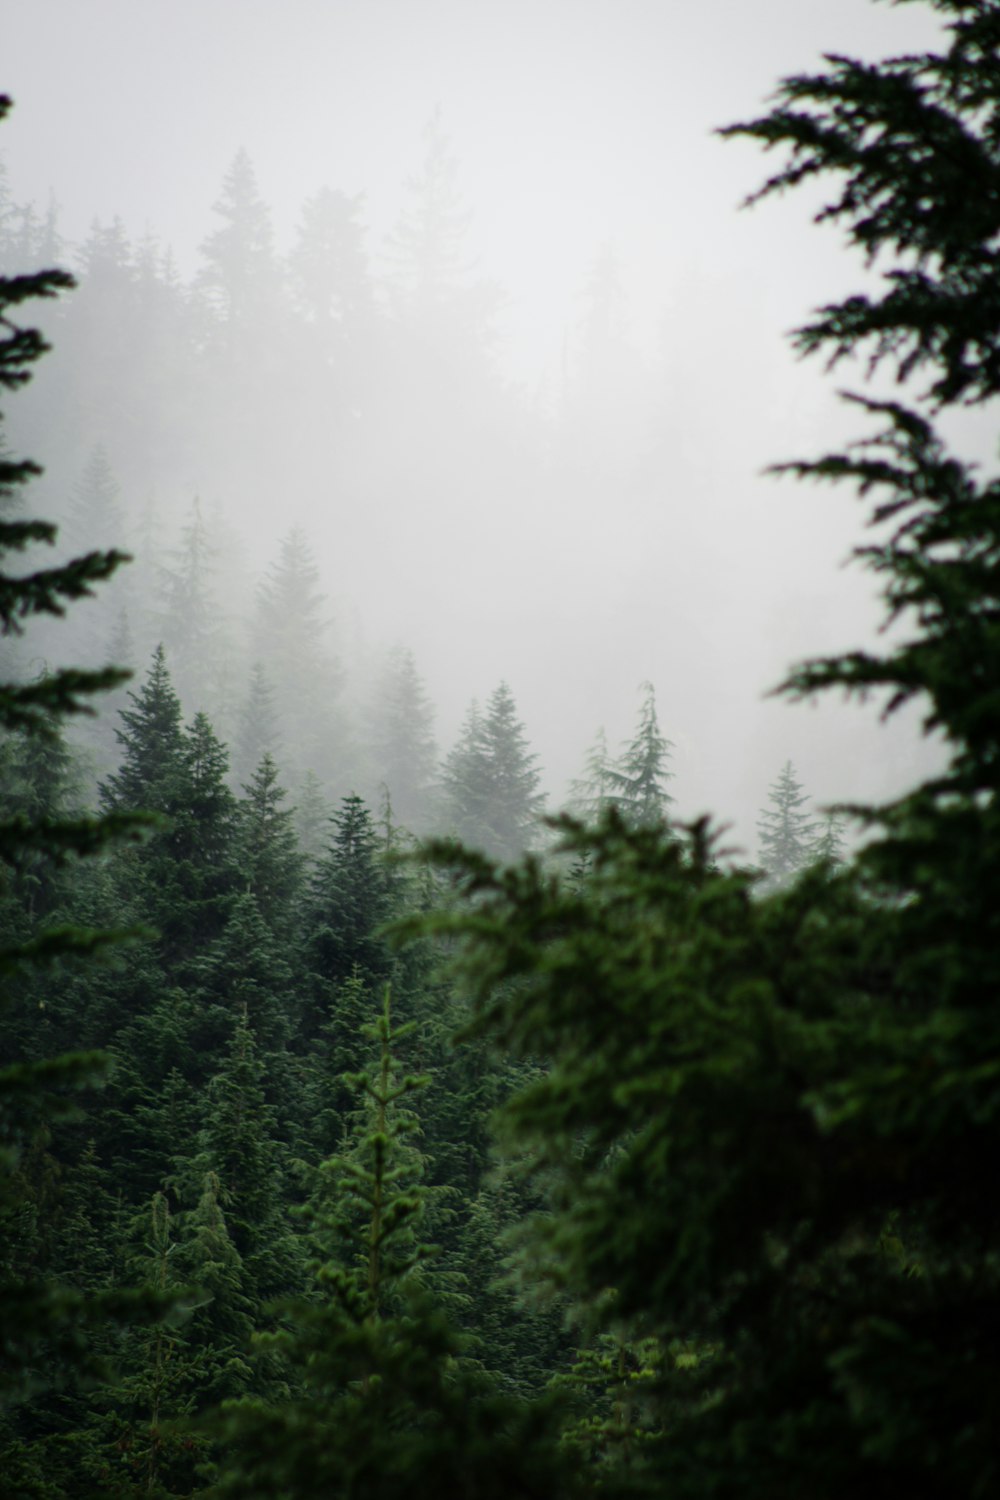 green trees surrounded by fogs